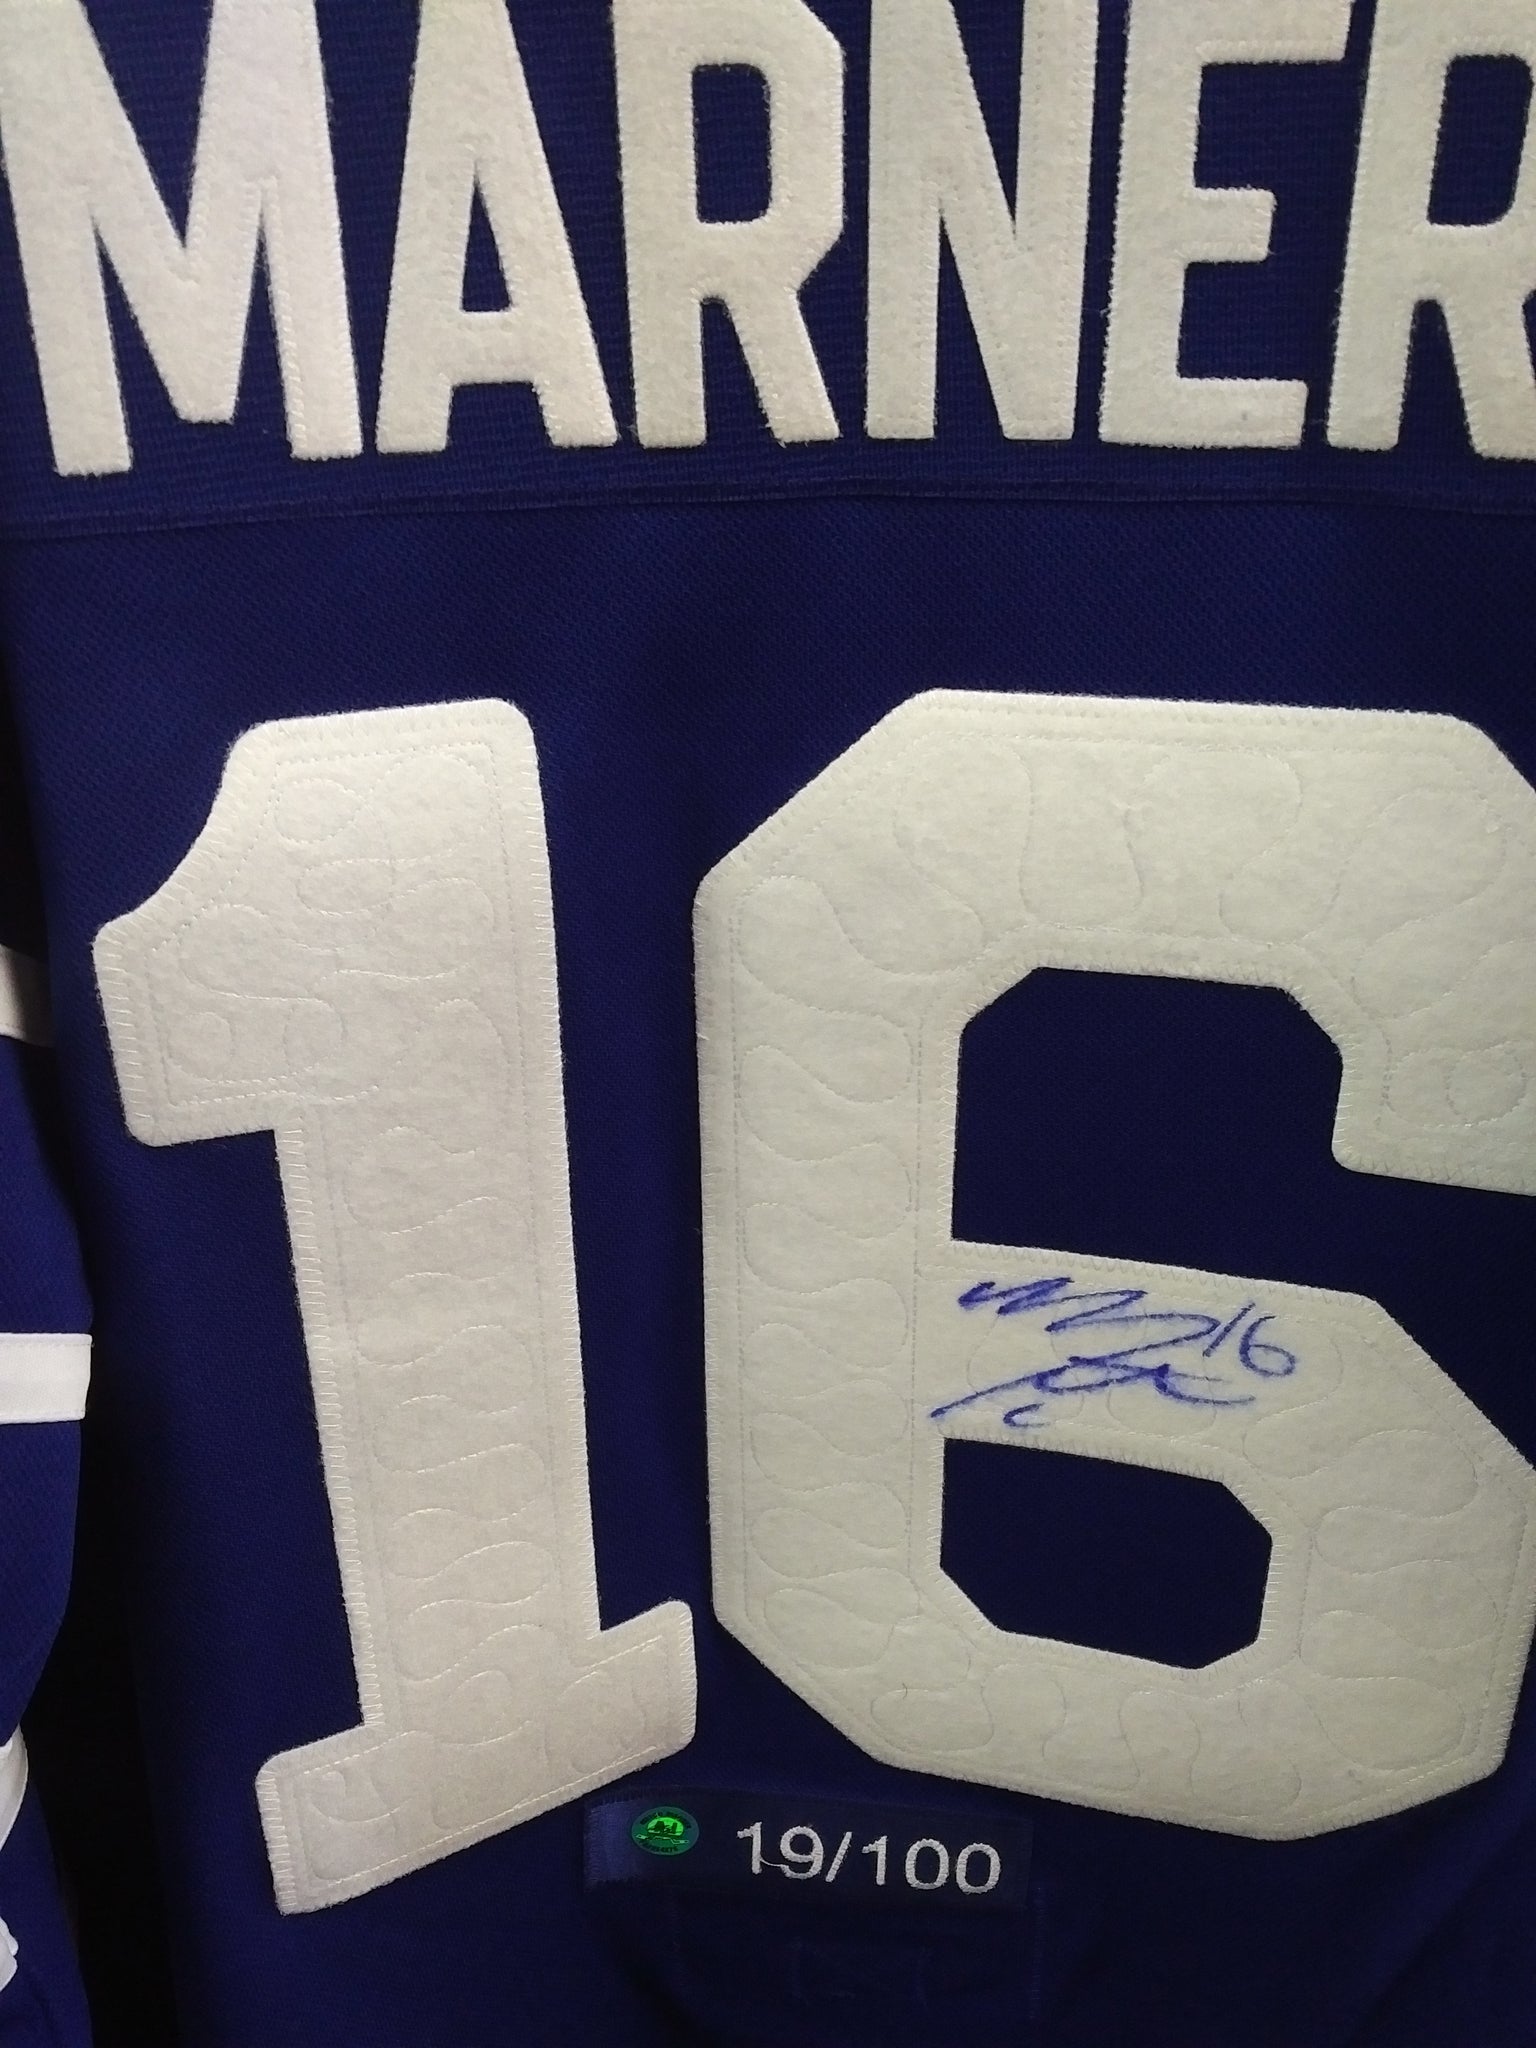 Marner,M Signed Jersey Toronto Arenas Blue Pro Adidas – iinta: what are you  into?